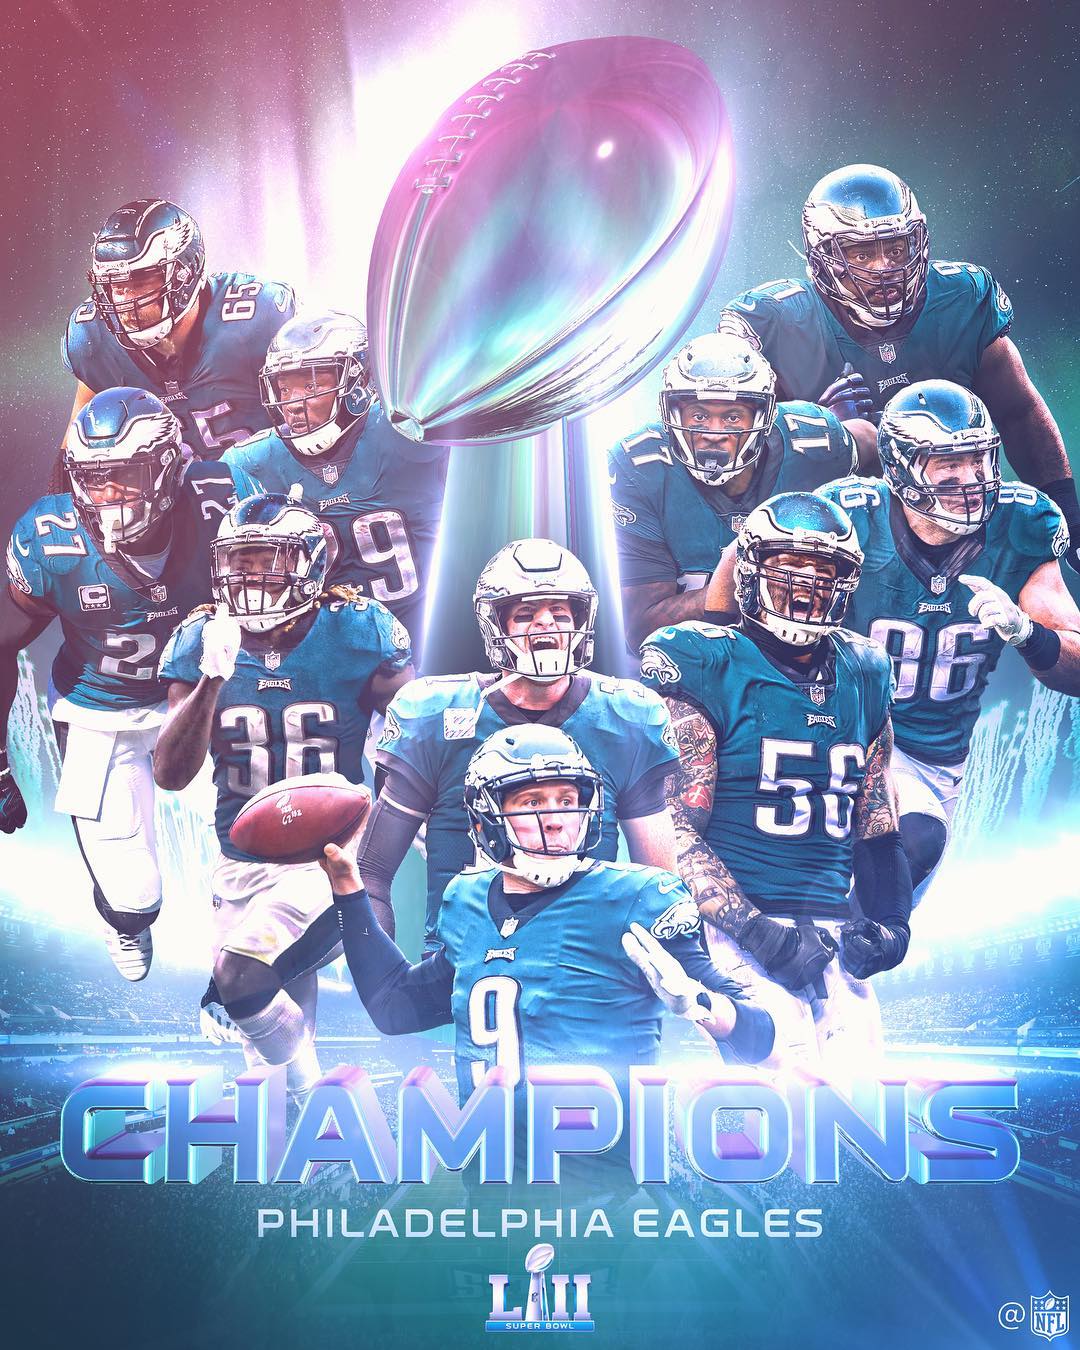 Nick Foles leads Philadelphia Eagles to 41-33 Super Bowl victory over New England Patriots